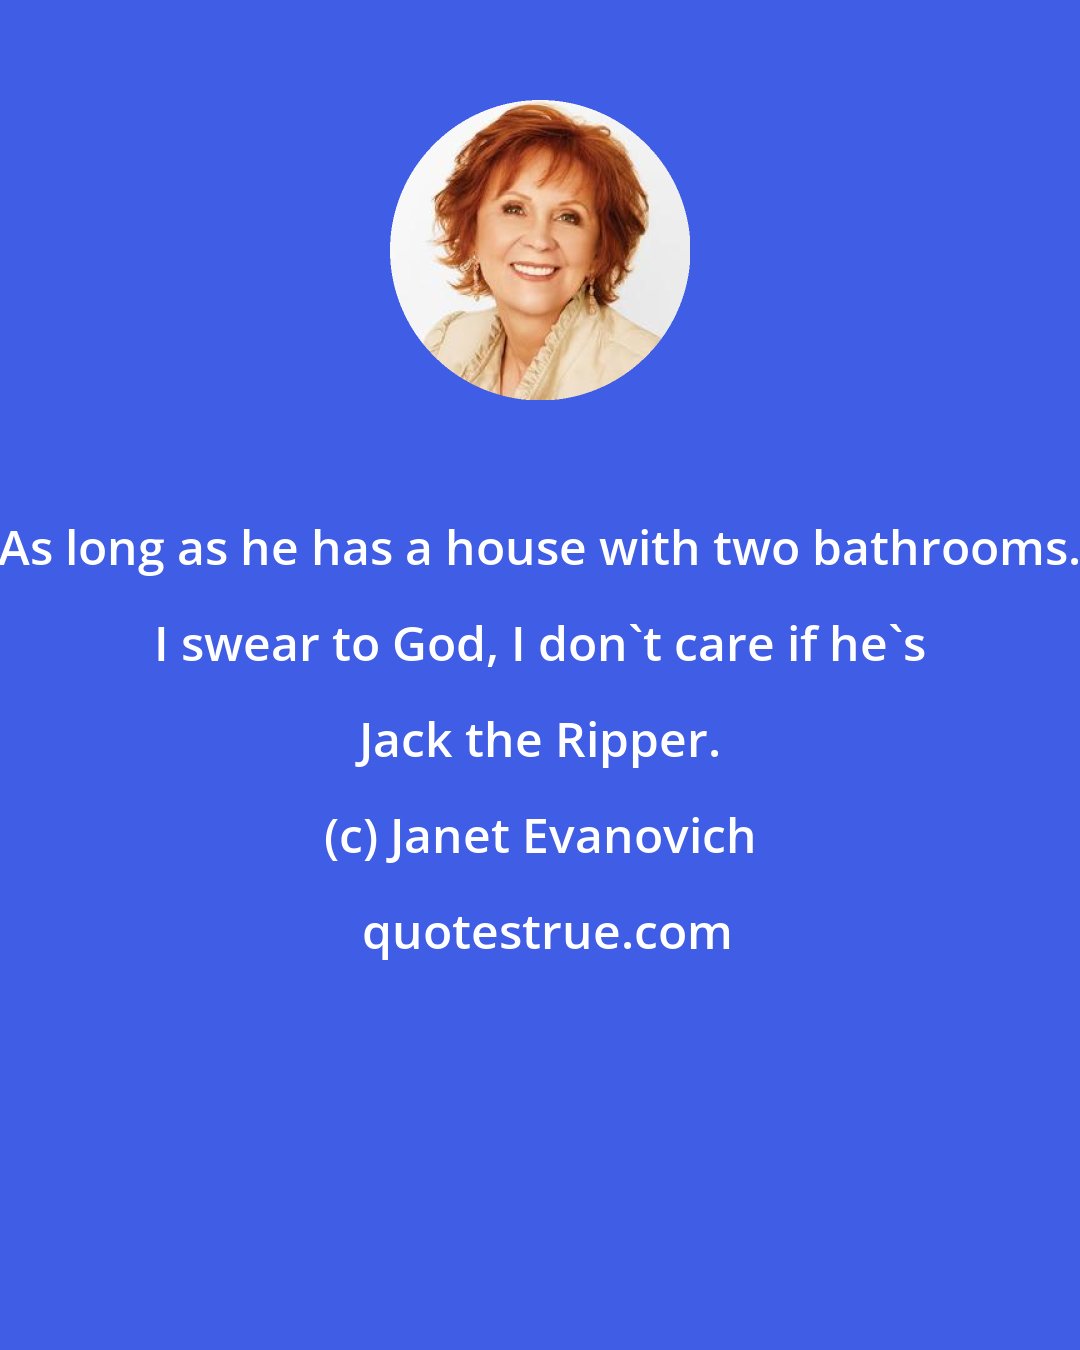 Janet Evanovich: As long as he has a house with two bathrooms. I swear to God, I don't care if he's Jack the Ripper.